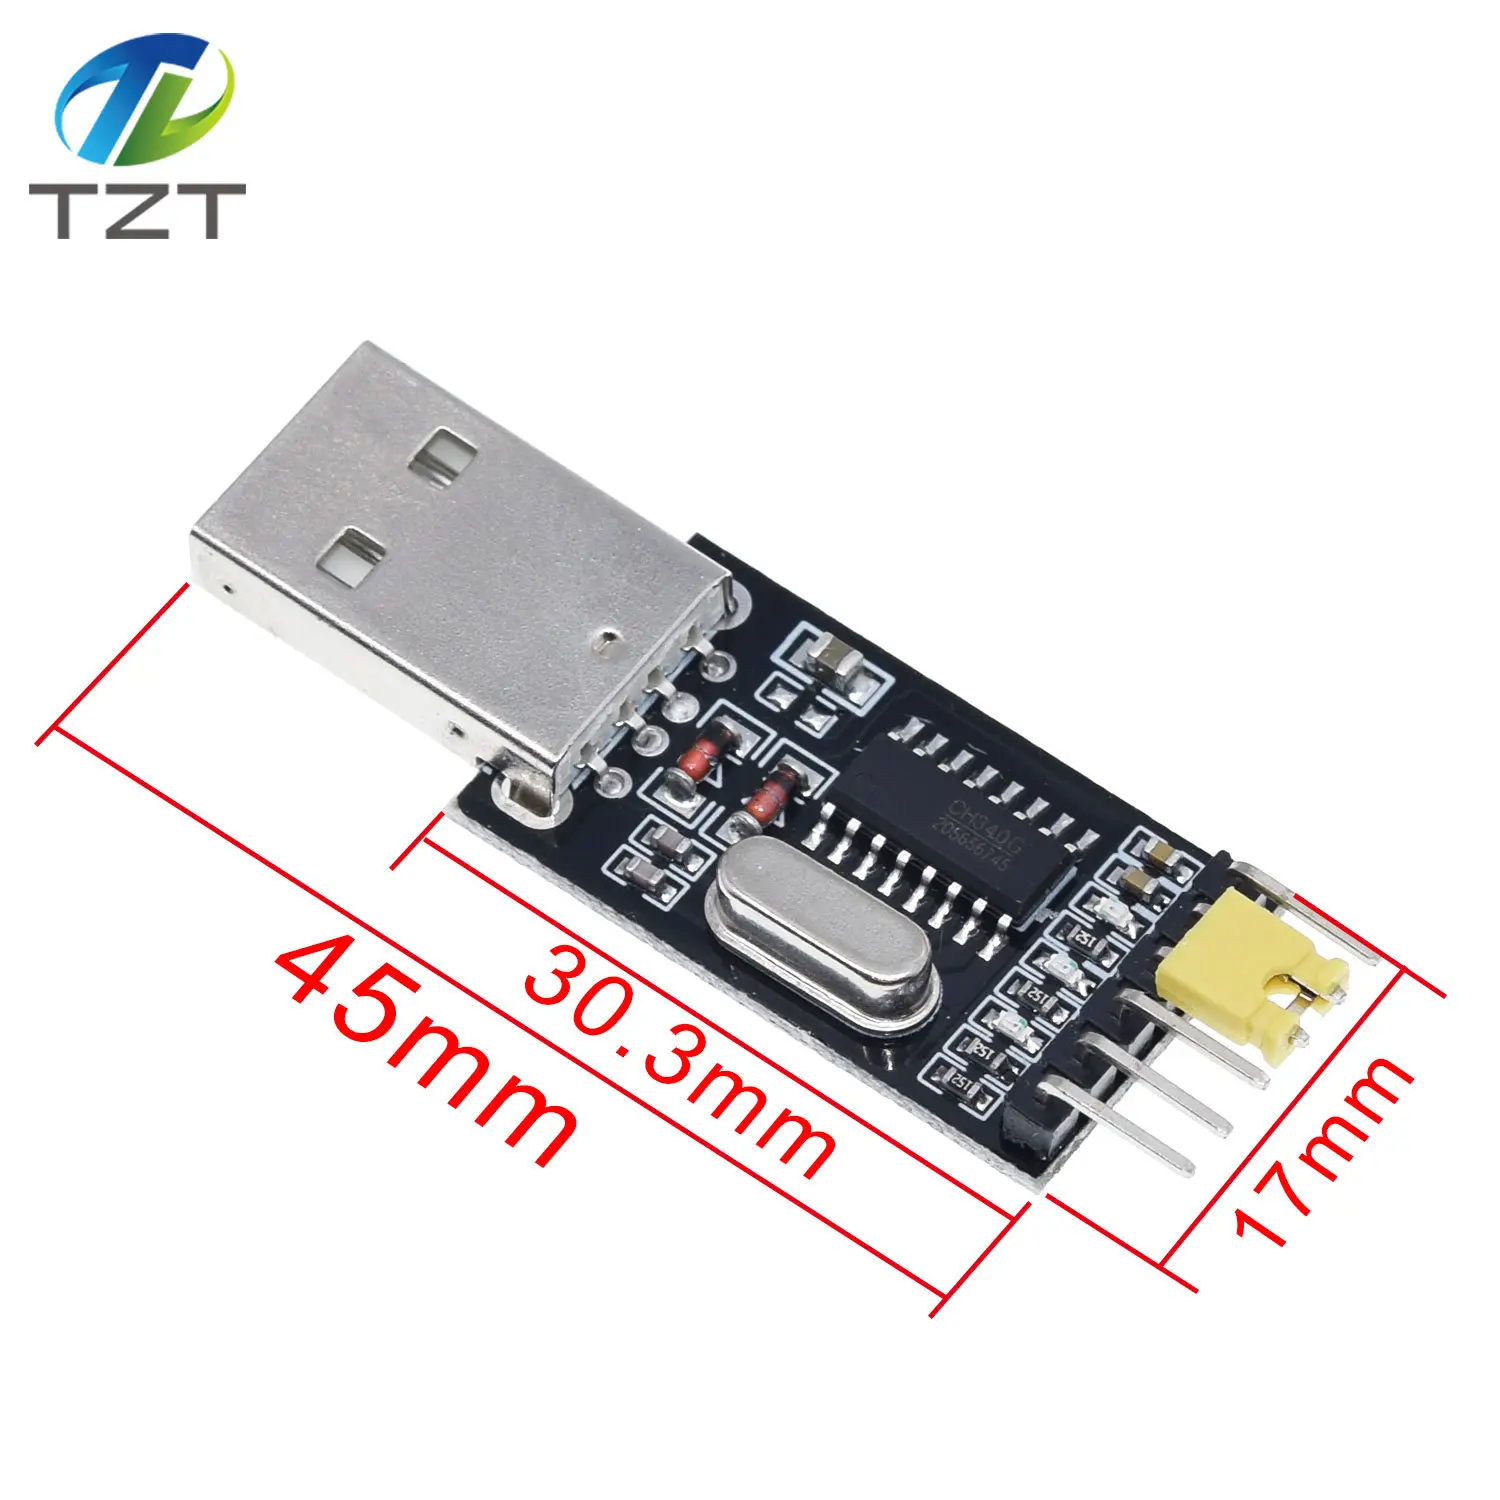 Details about   CH340G RS232 Upgrade to USB TTL Auto Converter Adapter STC Brush Module HFECY`TK 